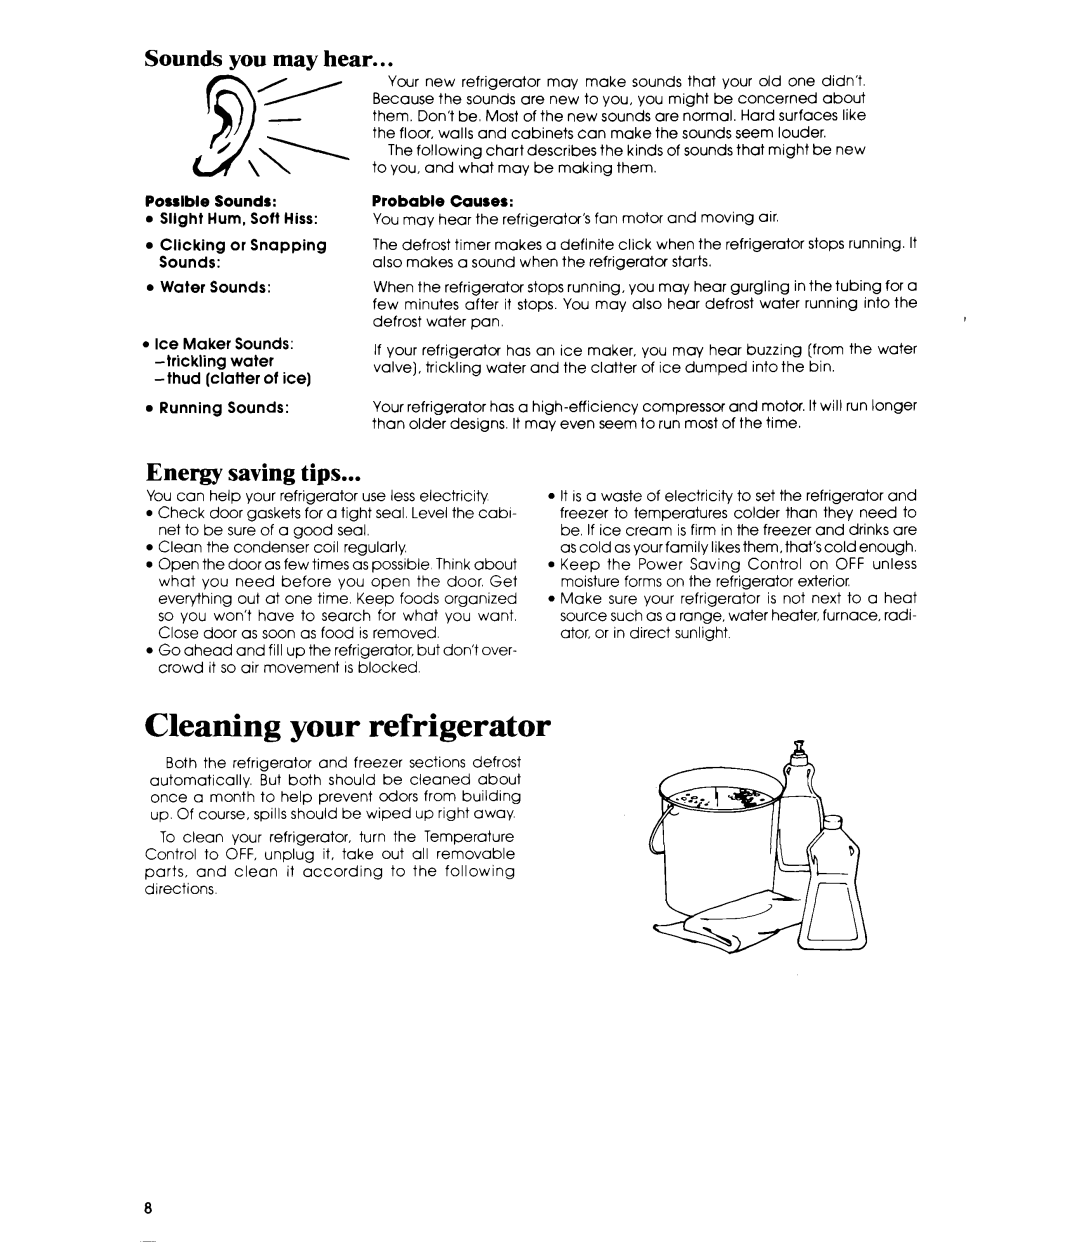 Whirlpool ED19CK Cleaning your refrigerator, Sounds you may hear, Energy, saving tips, Possible Sounds, Probable Causes 